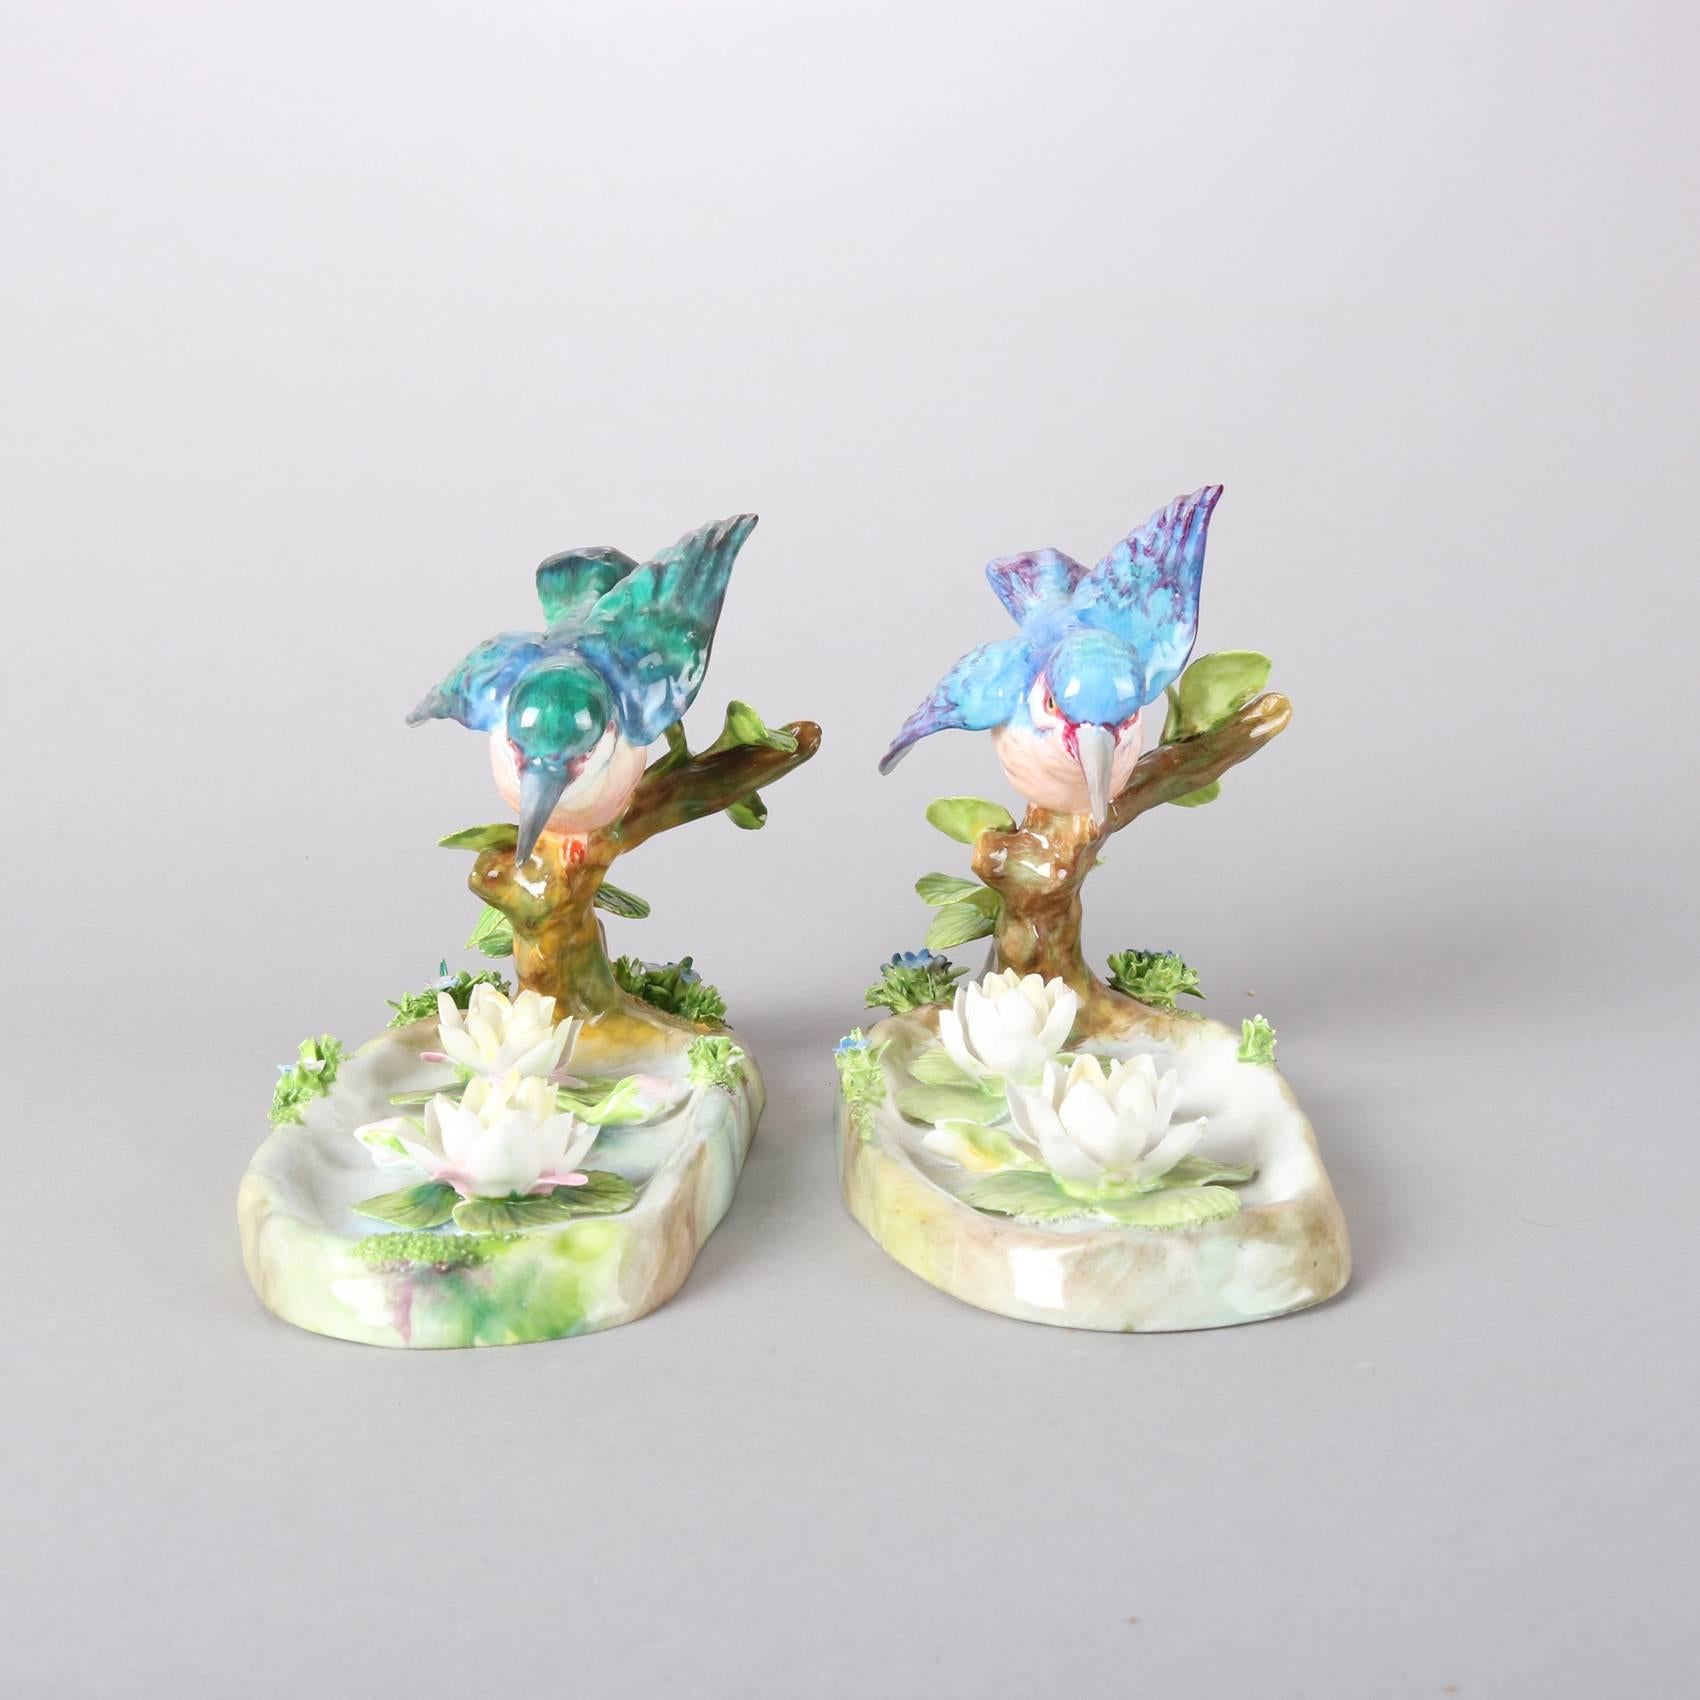 Hand-Painted Pair of Antique English Staffordshire Porcelain J. T. Jones King Fishers